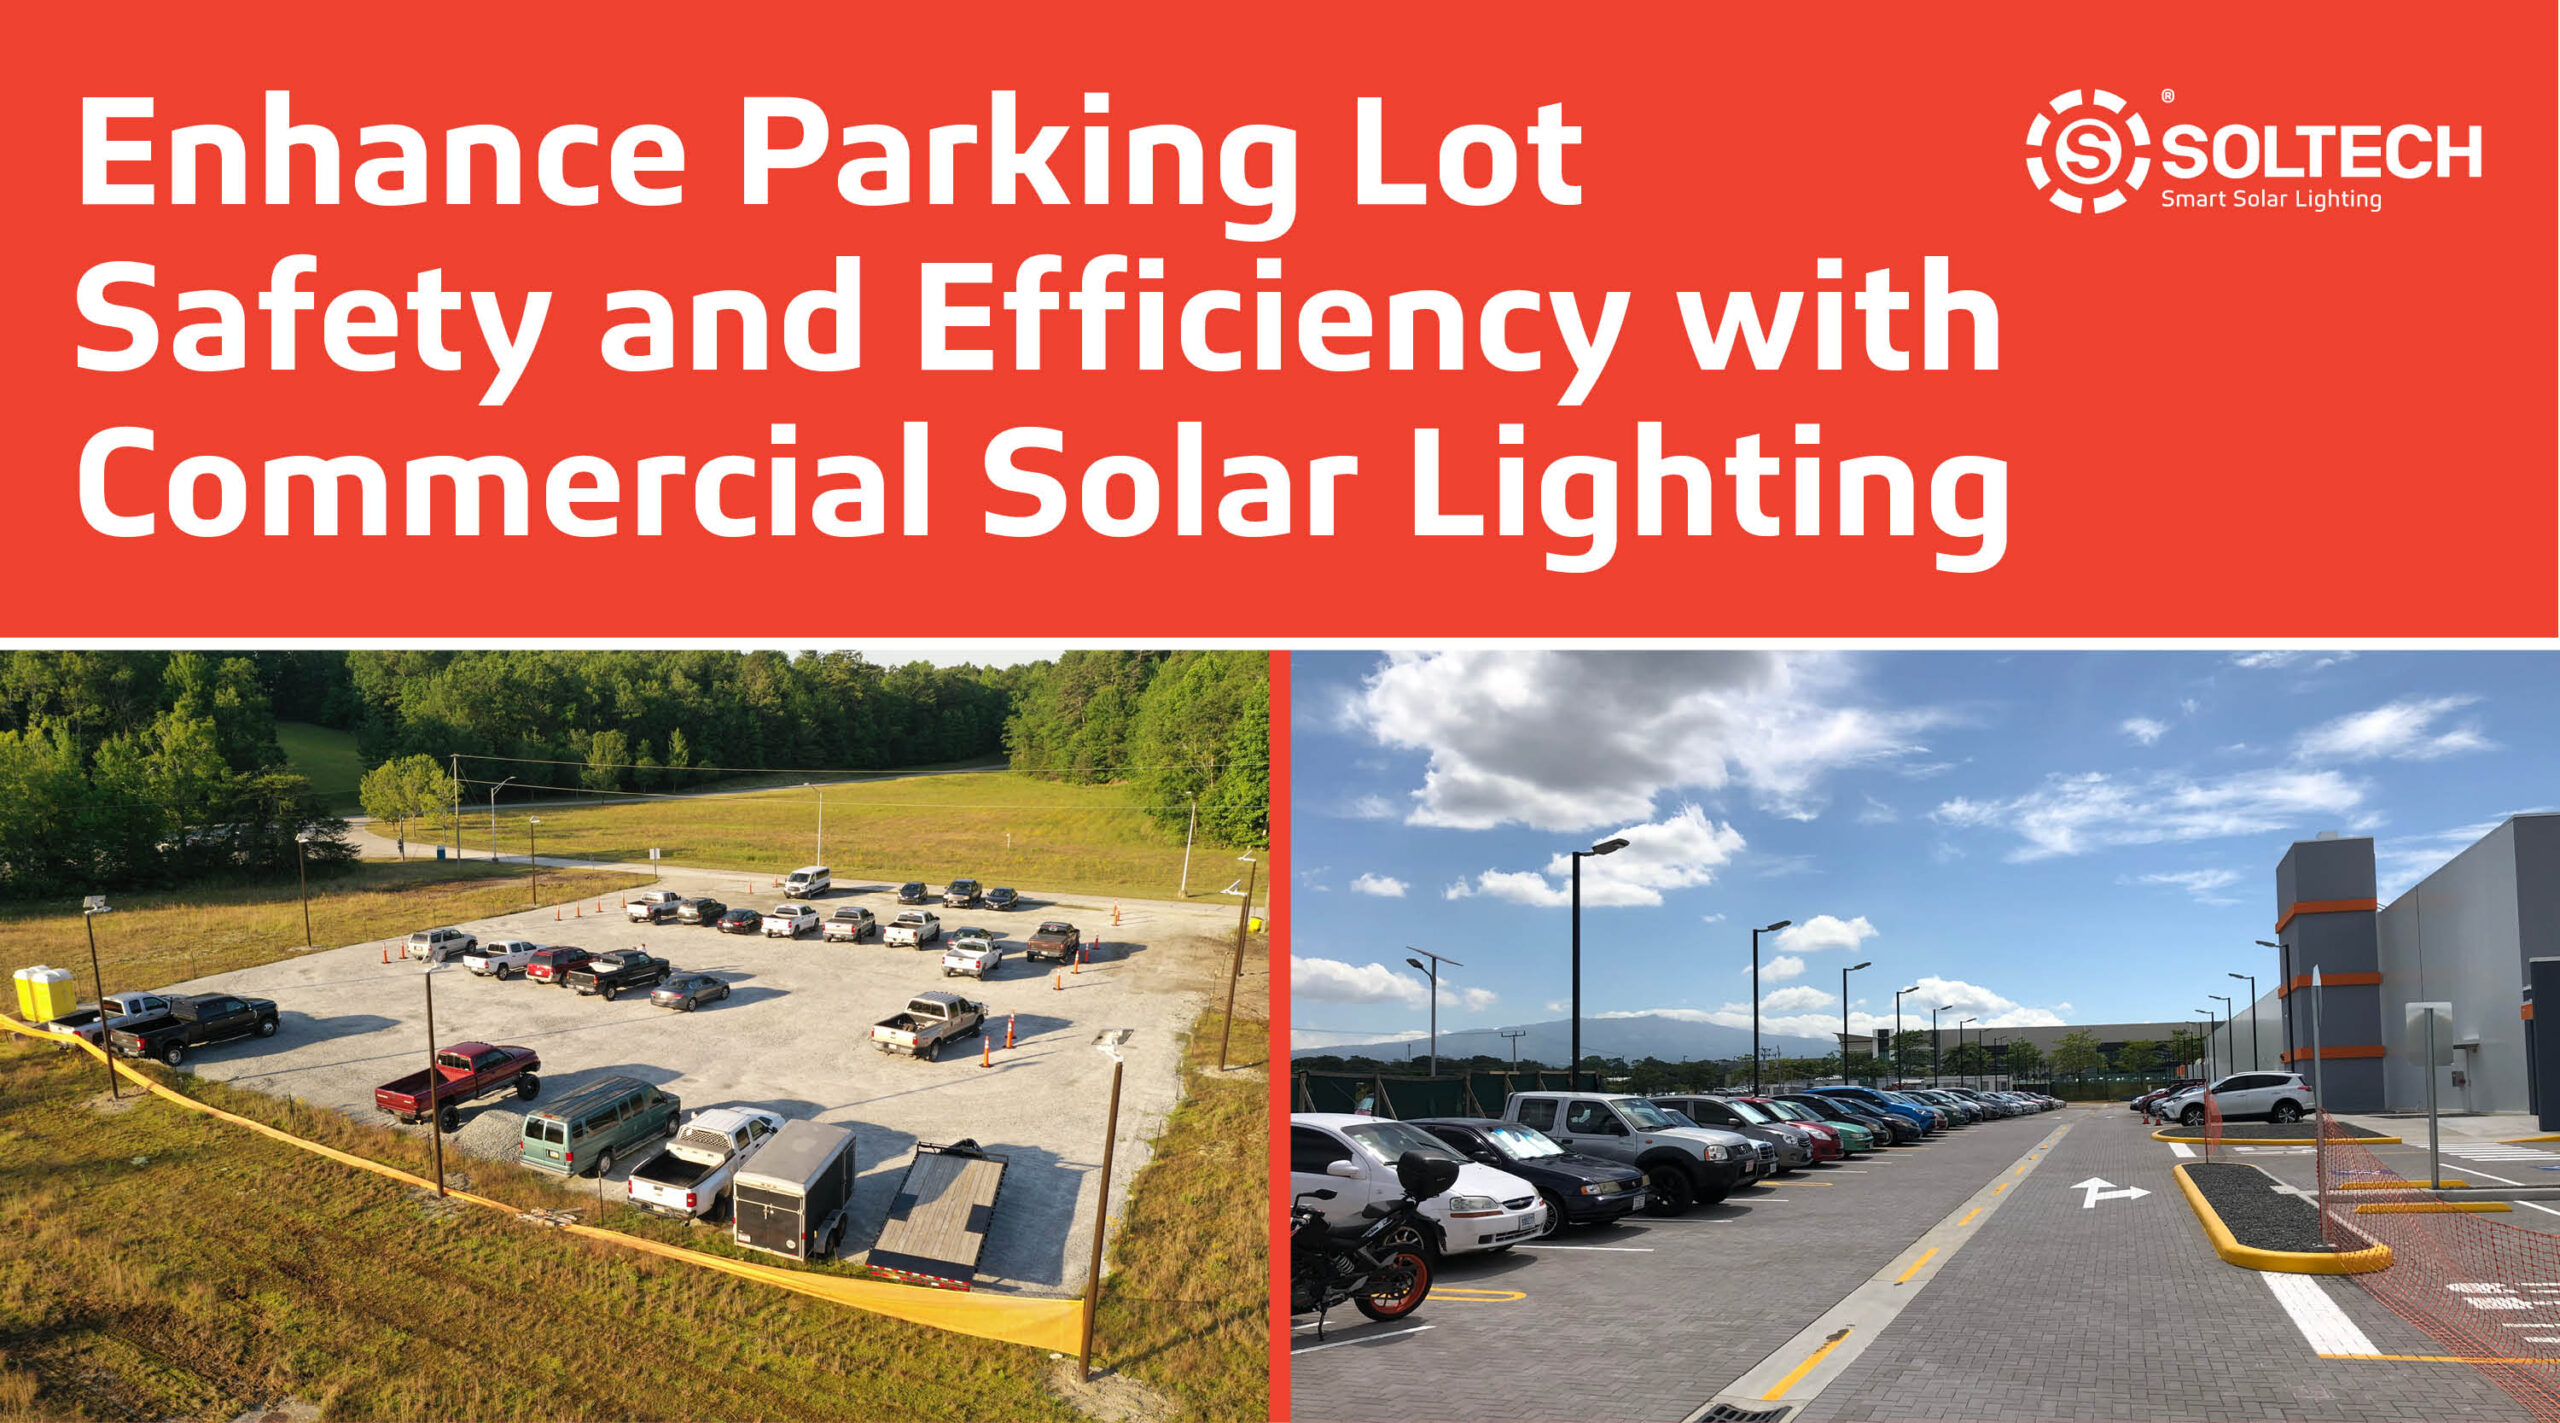 Enhance Parking Lot Safety and Efficiency with Commercial Solar Lighting